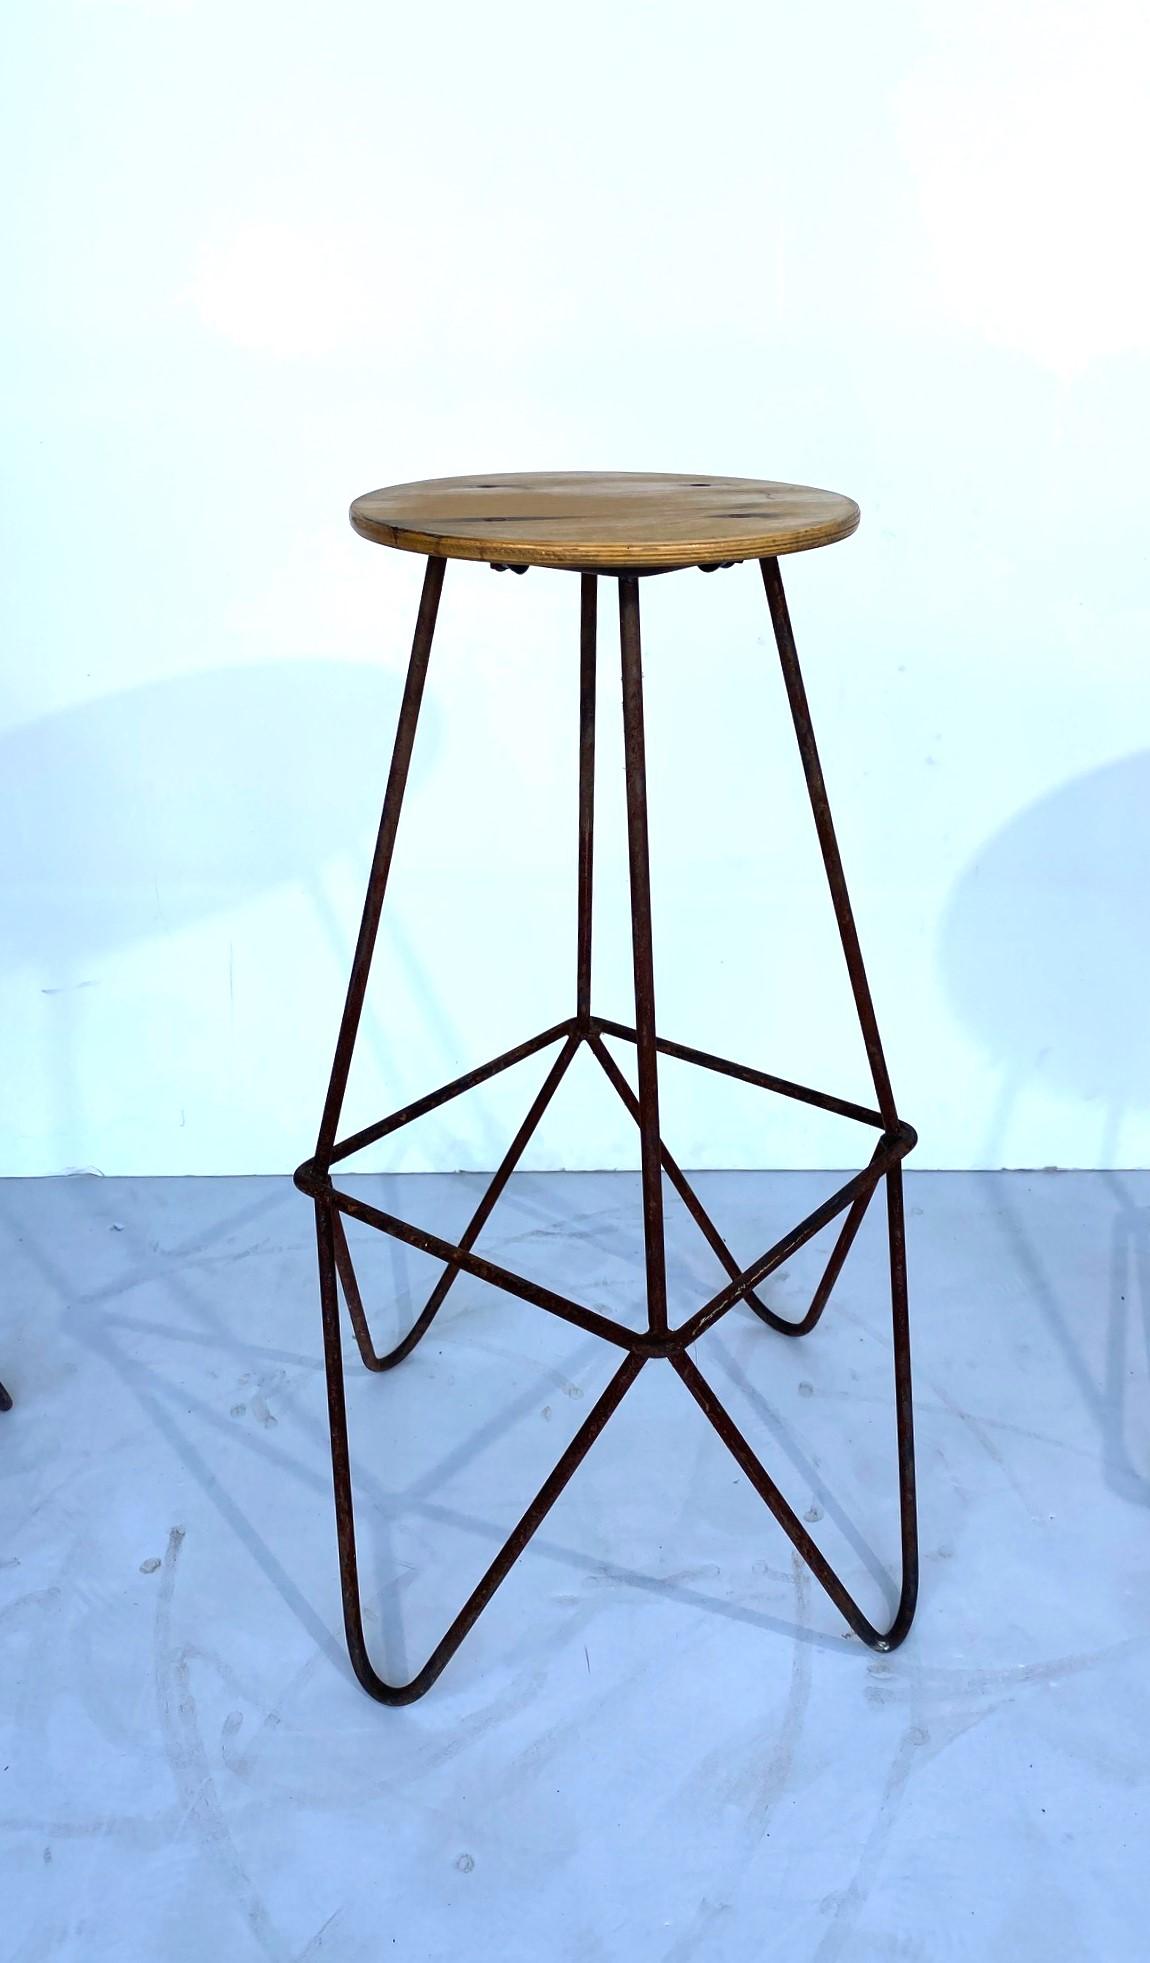 Set of three iron base barstools. The seat has four screws that attach to the base.